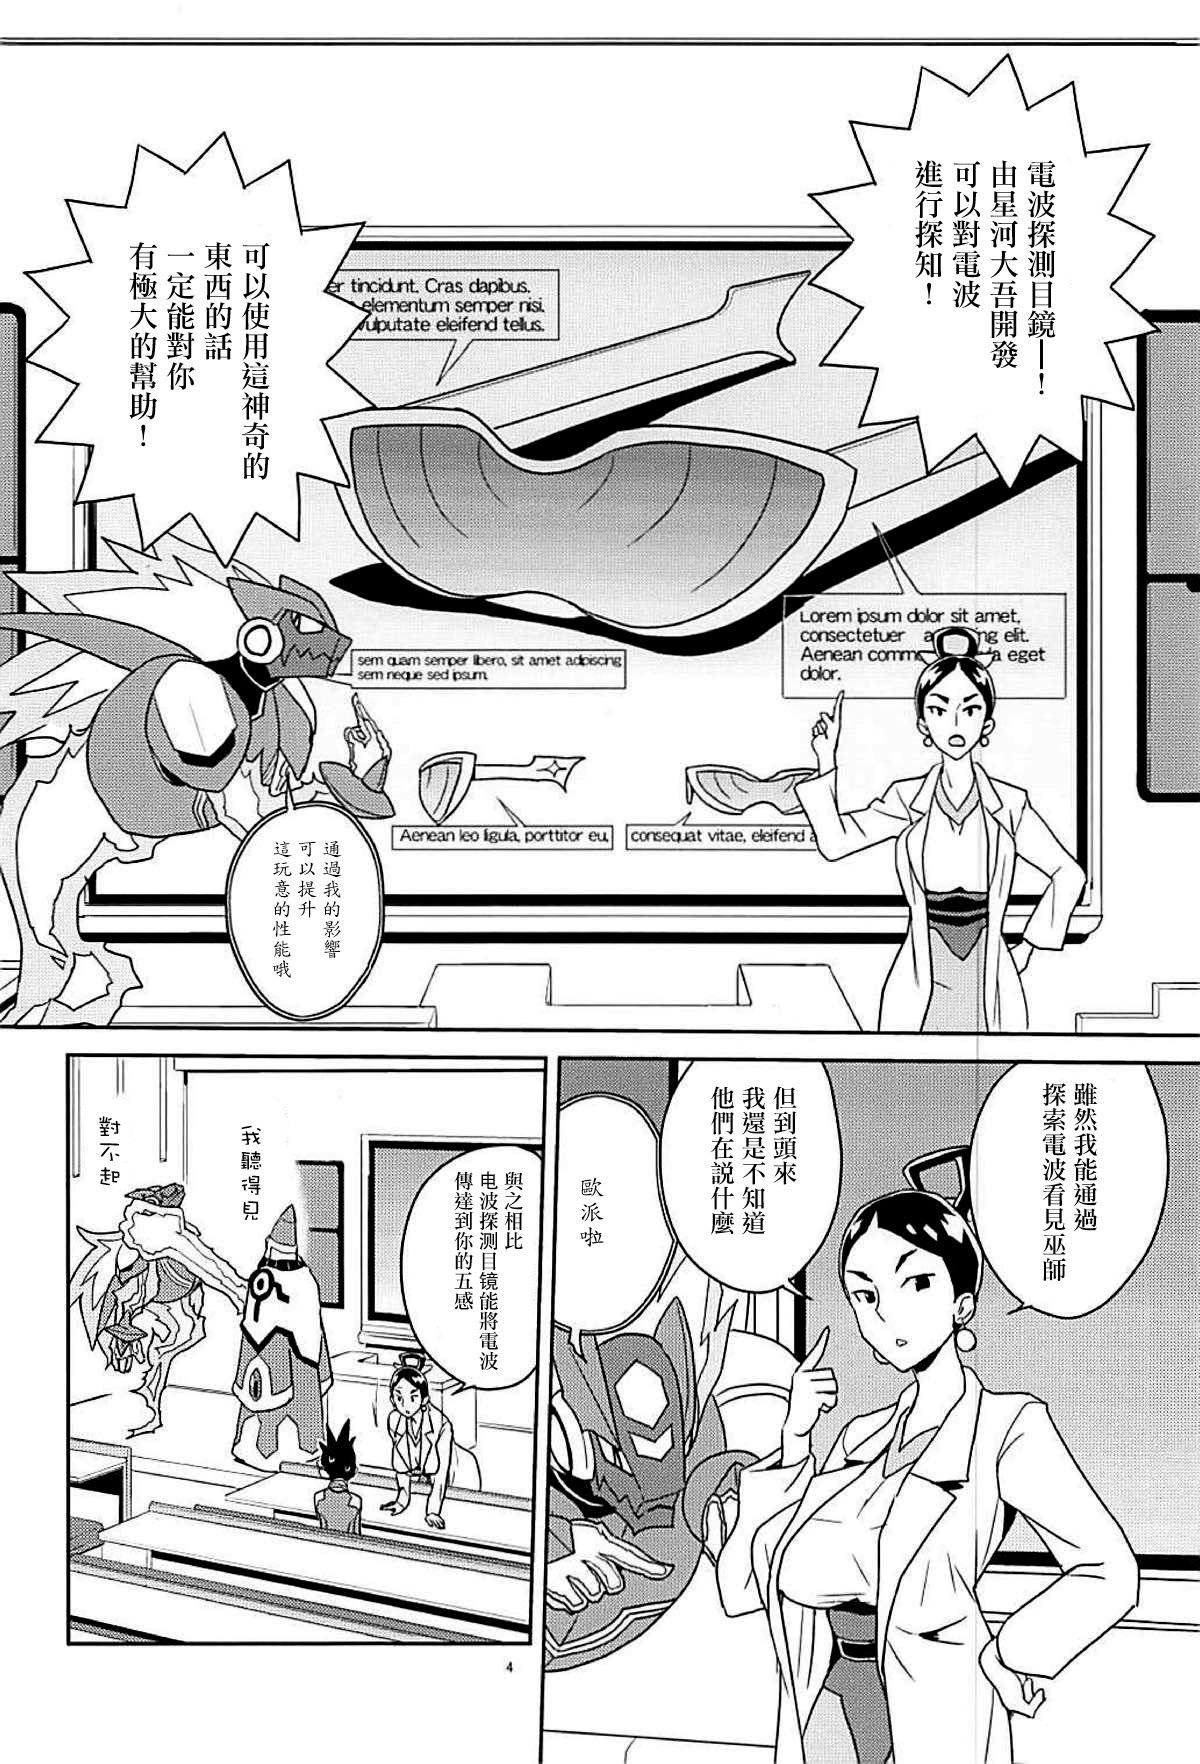 Gay Materialize Shirogane Luna - Mega man star force Bubble - Page 4